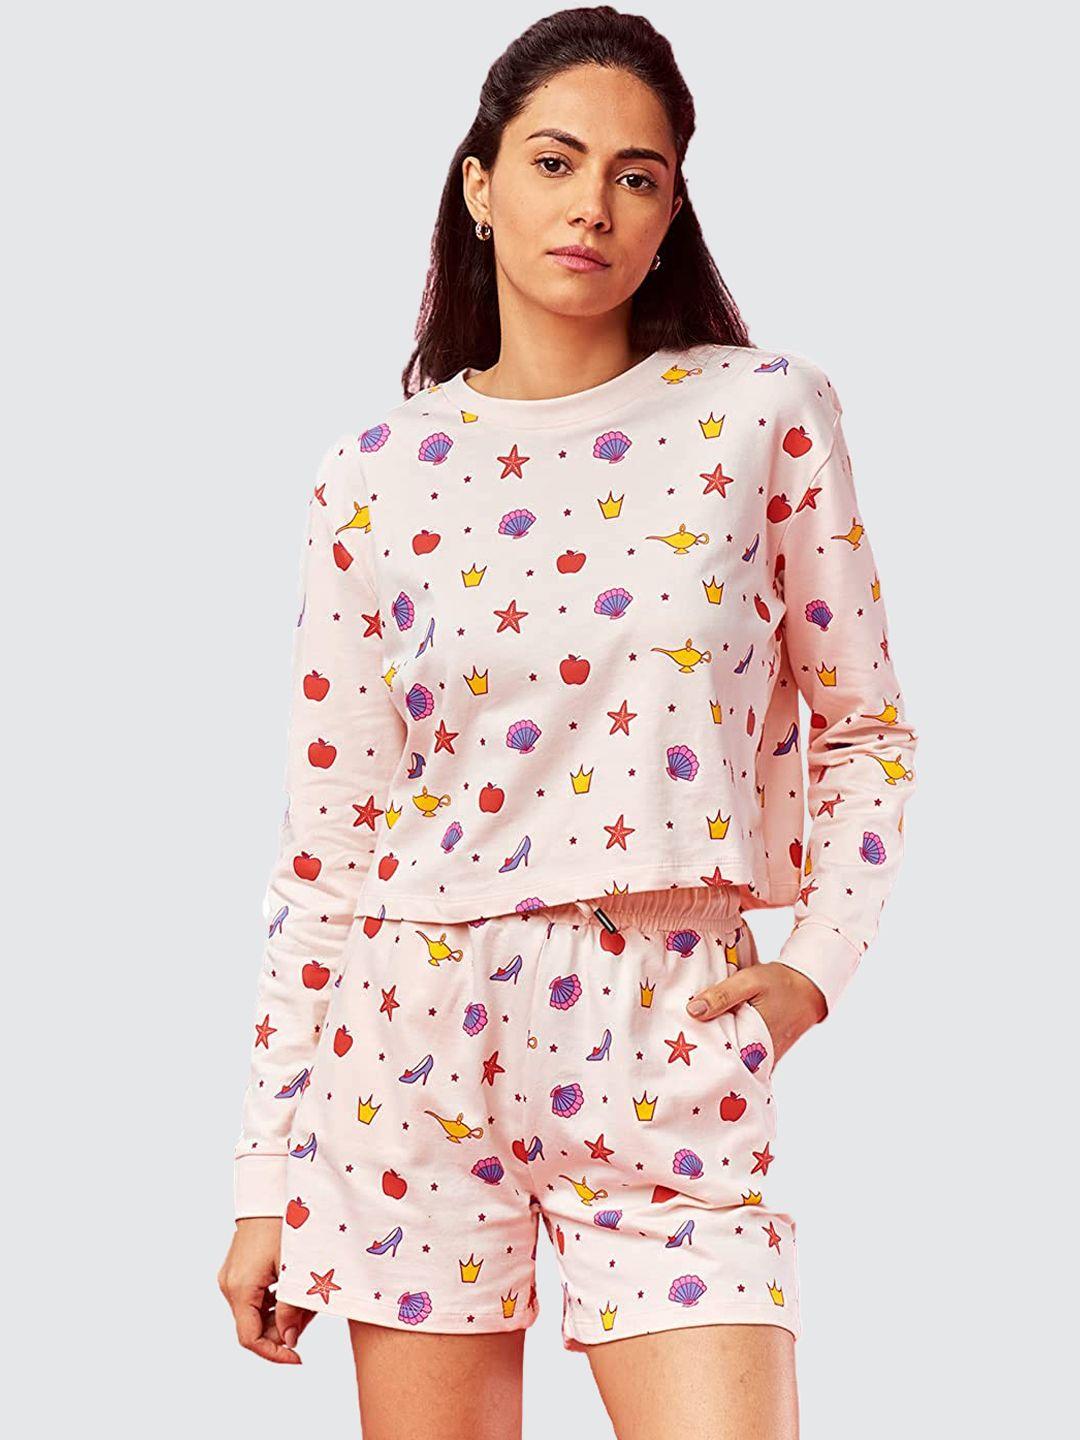 the souled store pink women disney printed co-ords